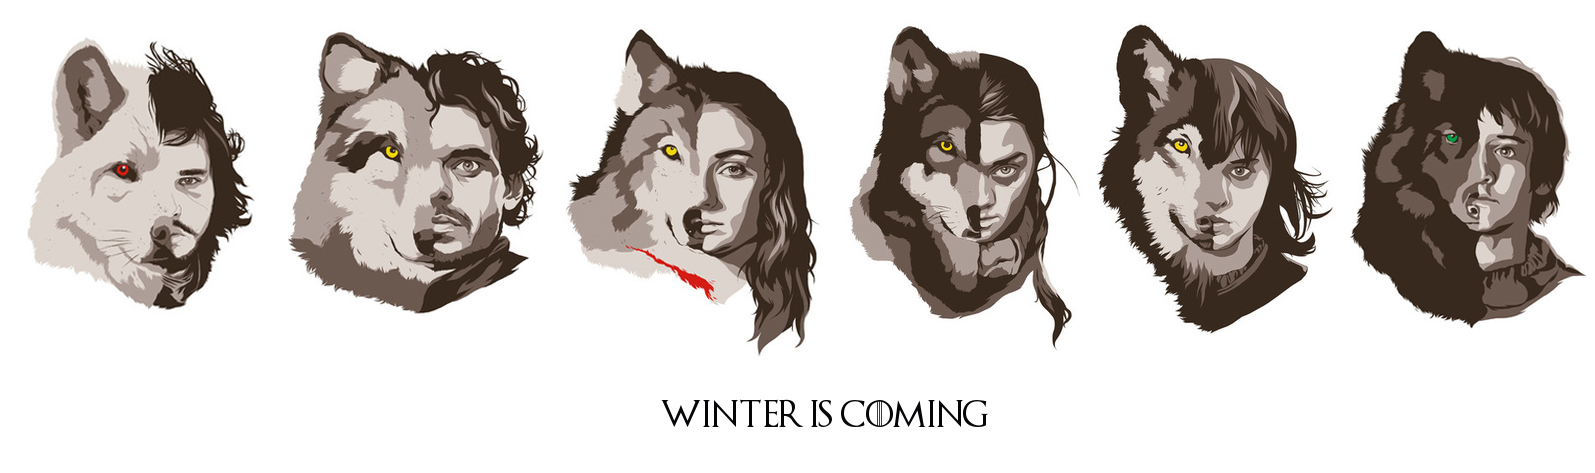 From Another Post Of The Illustrations Stark Children And Their